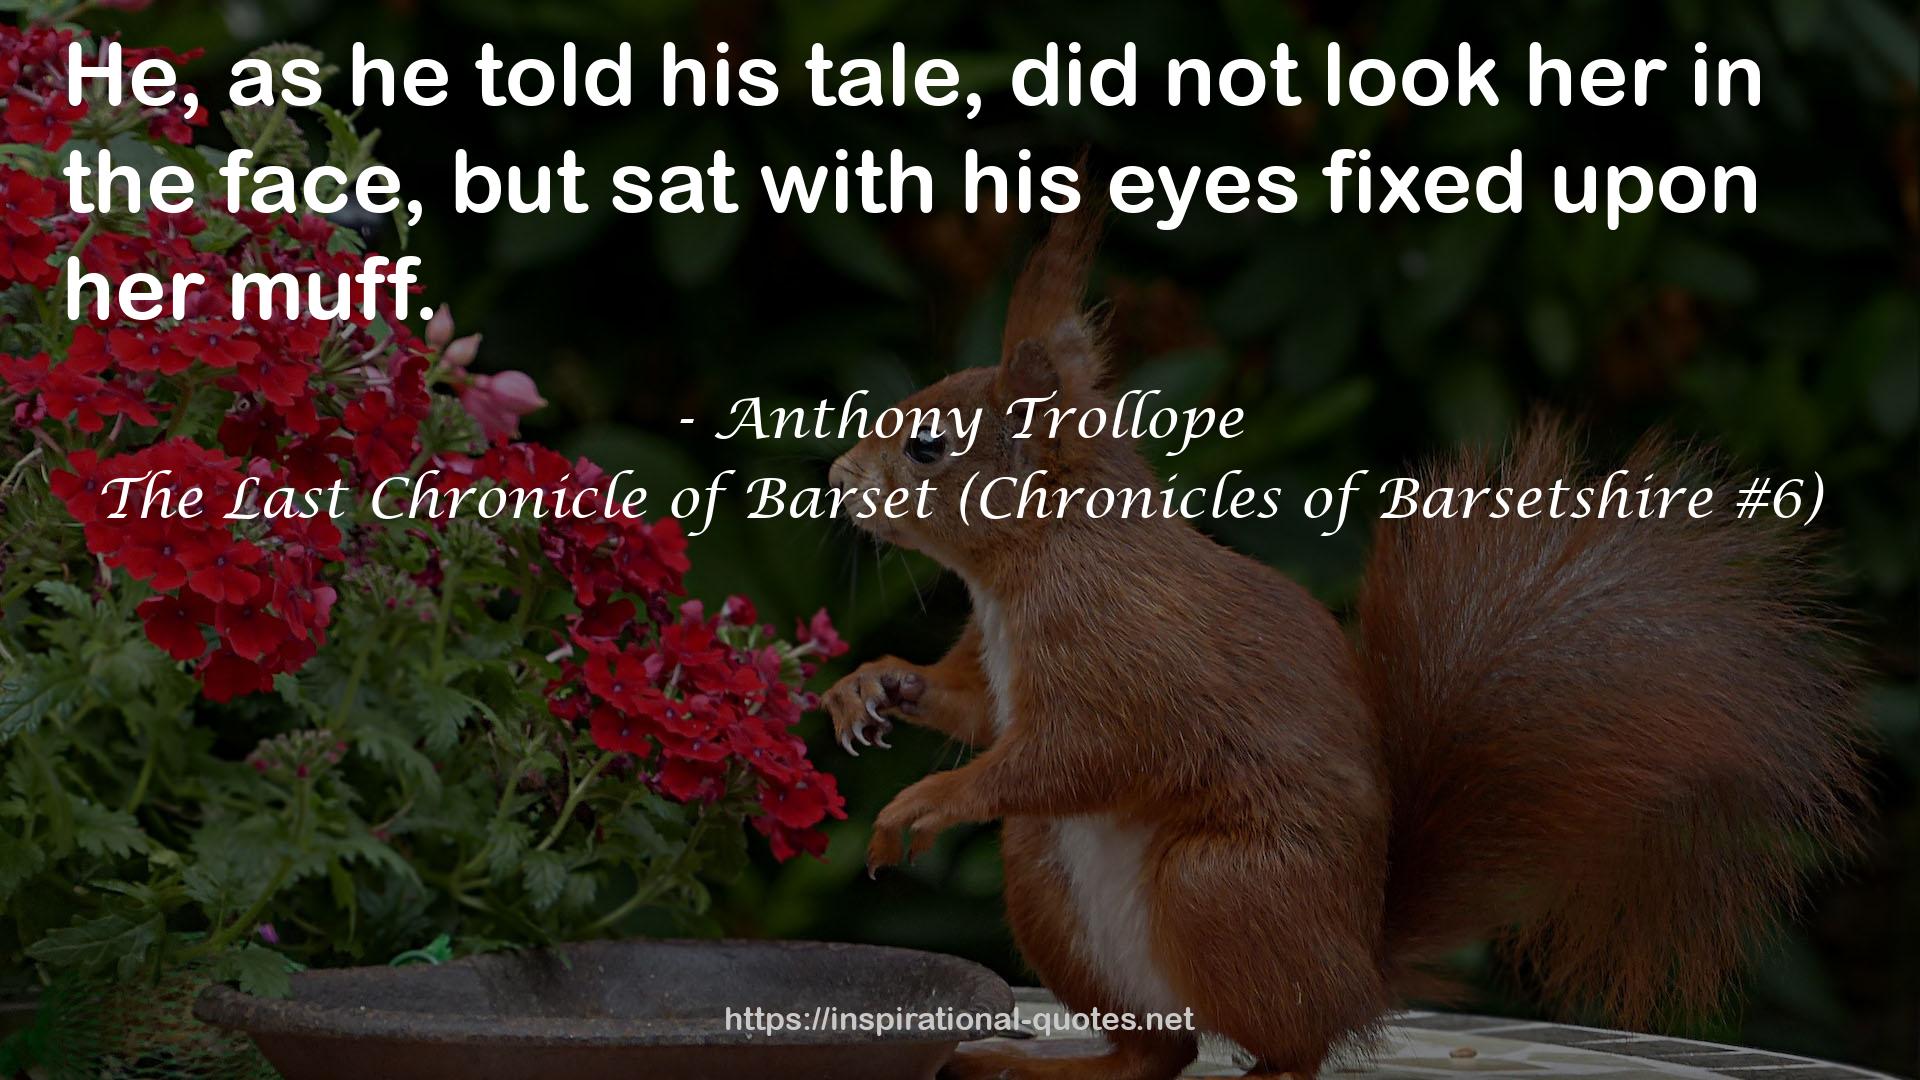 The Last Chronicle of Barset (Chronicles of Barsetshire #6) QUOTES